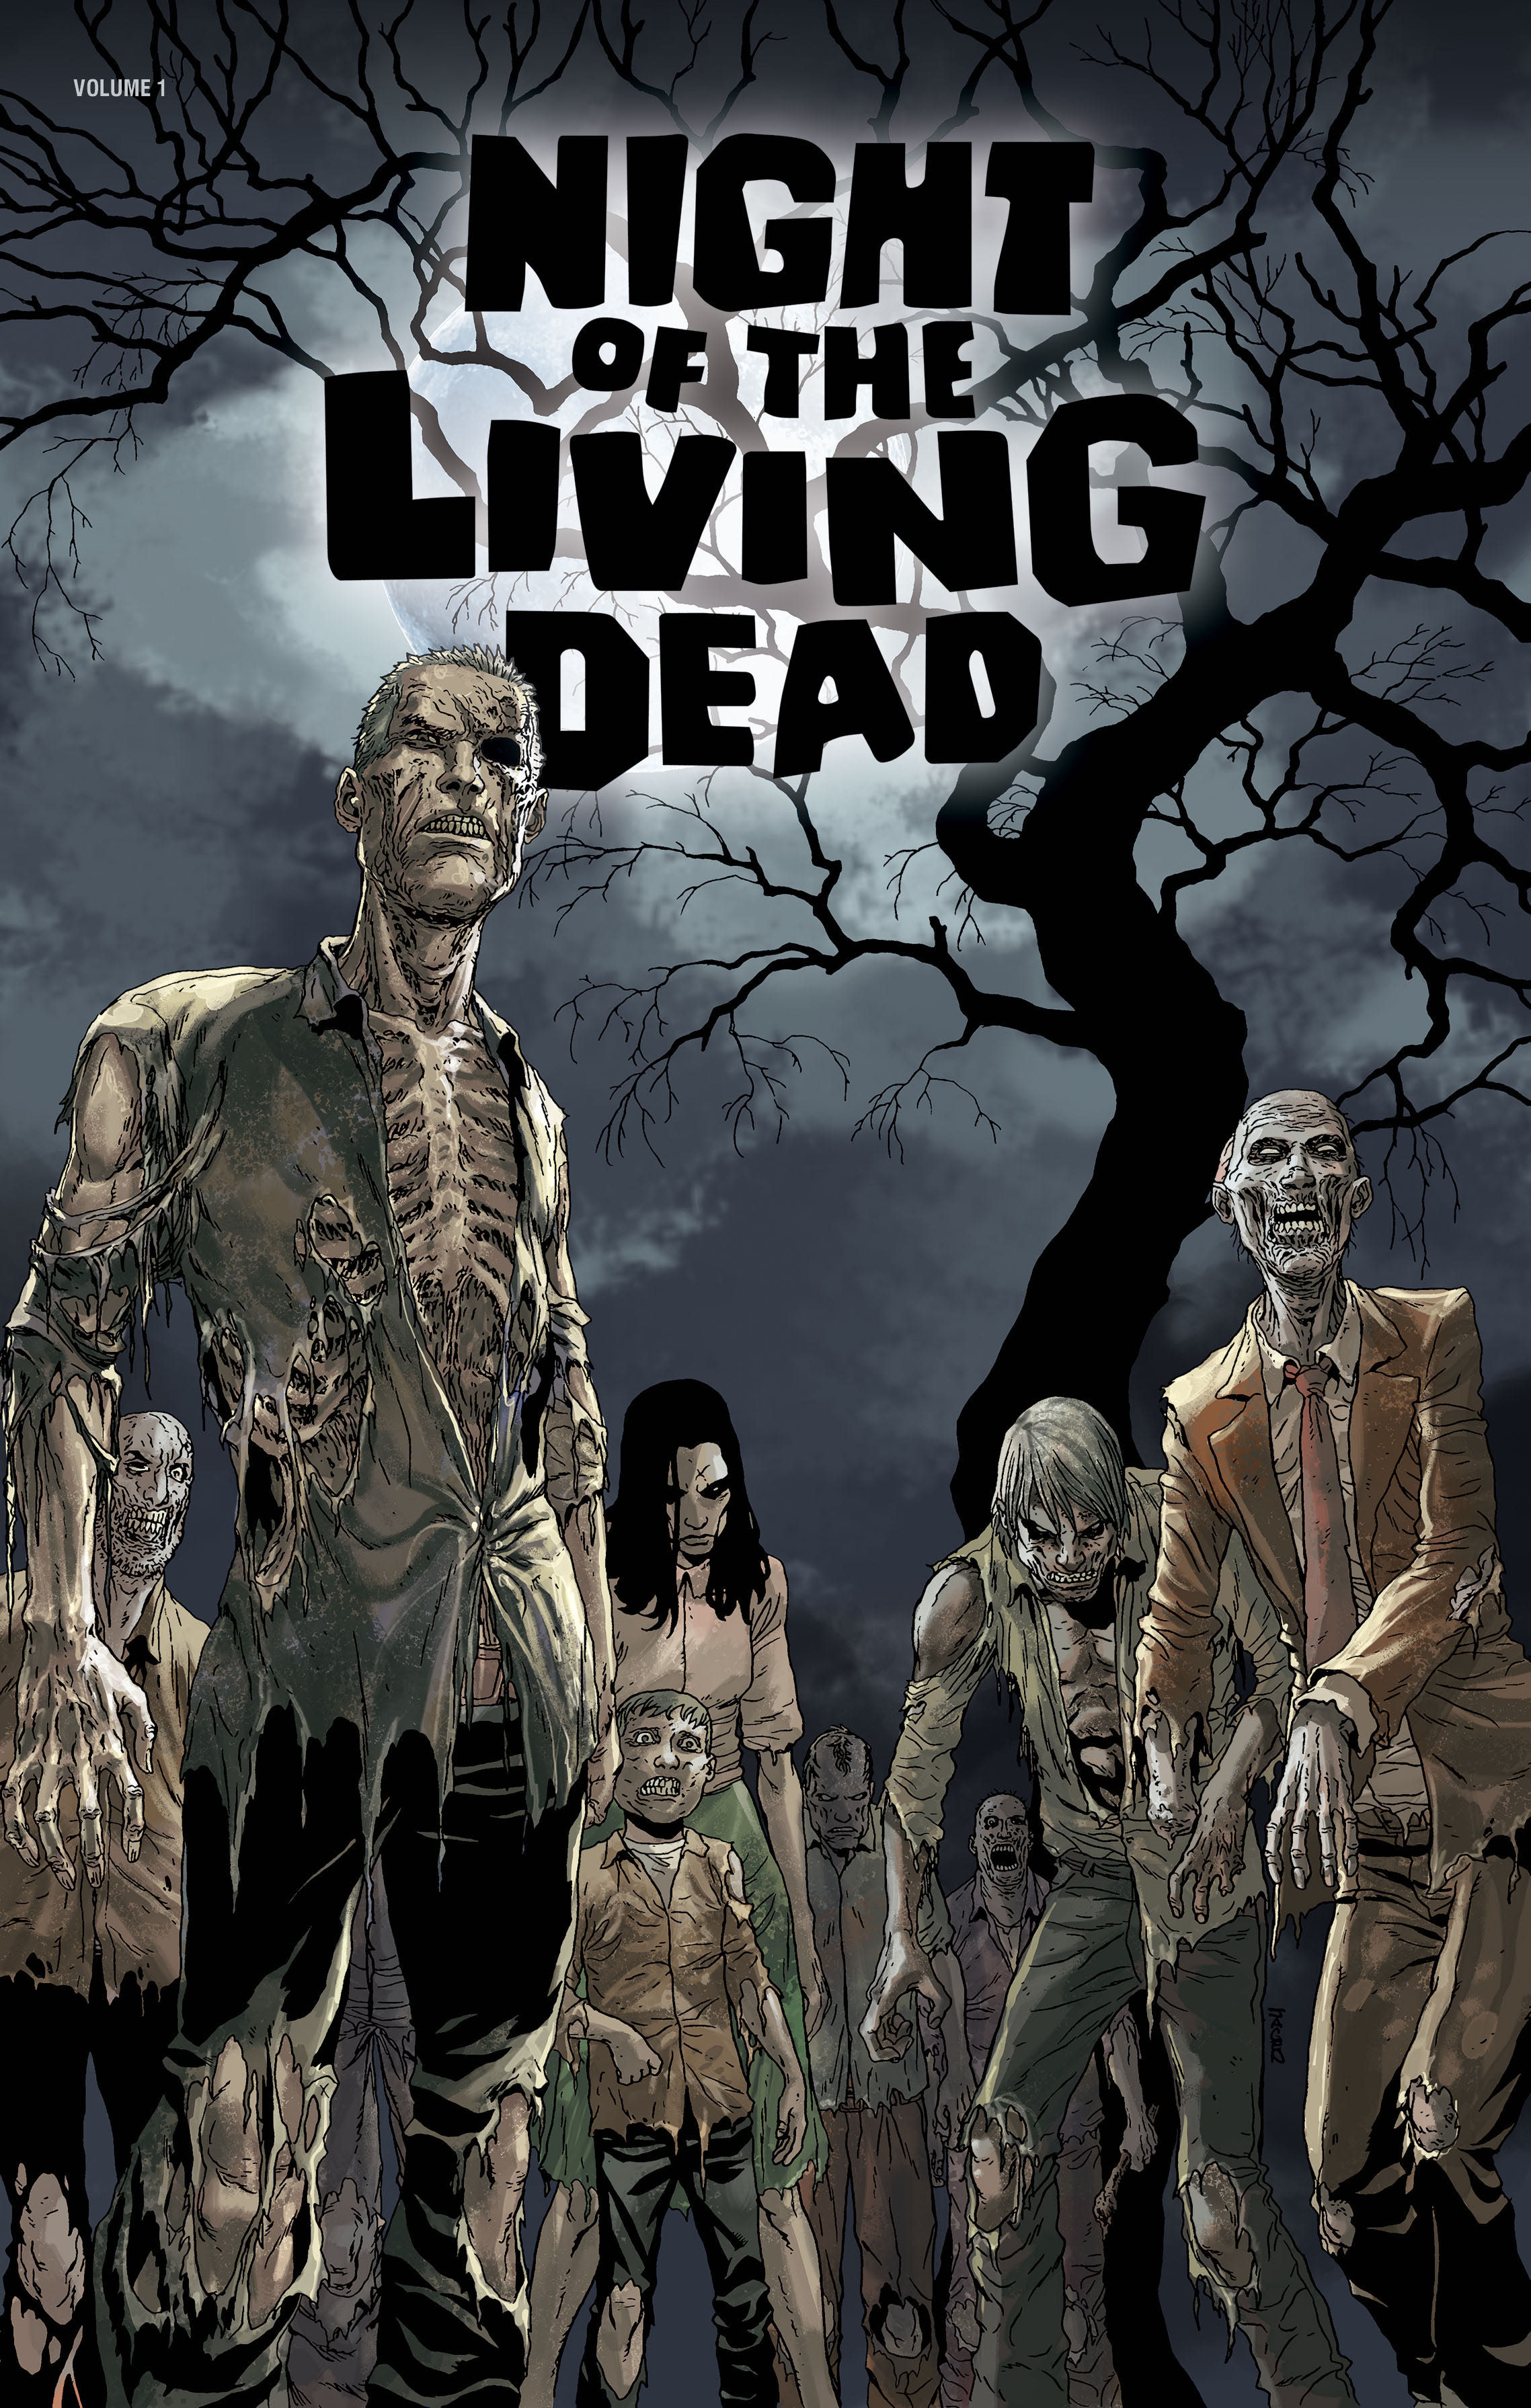 Night of the Living Dead Vol. 1 (Signed Edition) | Fresh Comics night of the living dead movies